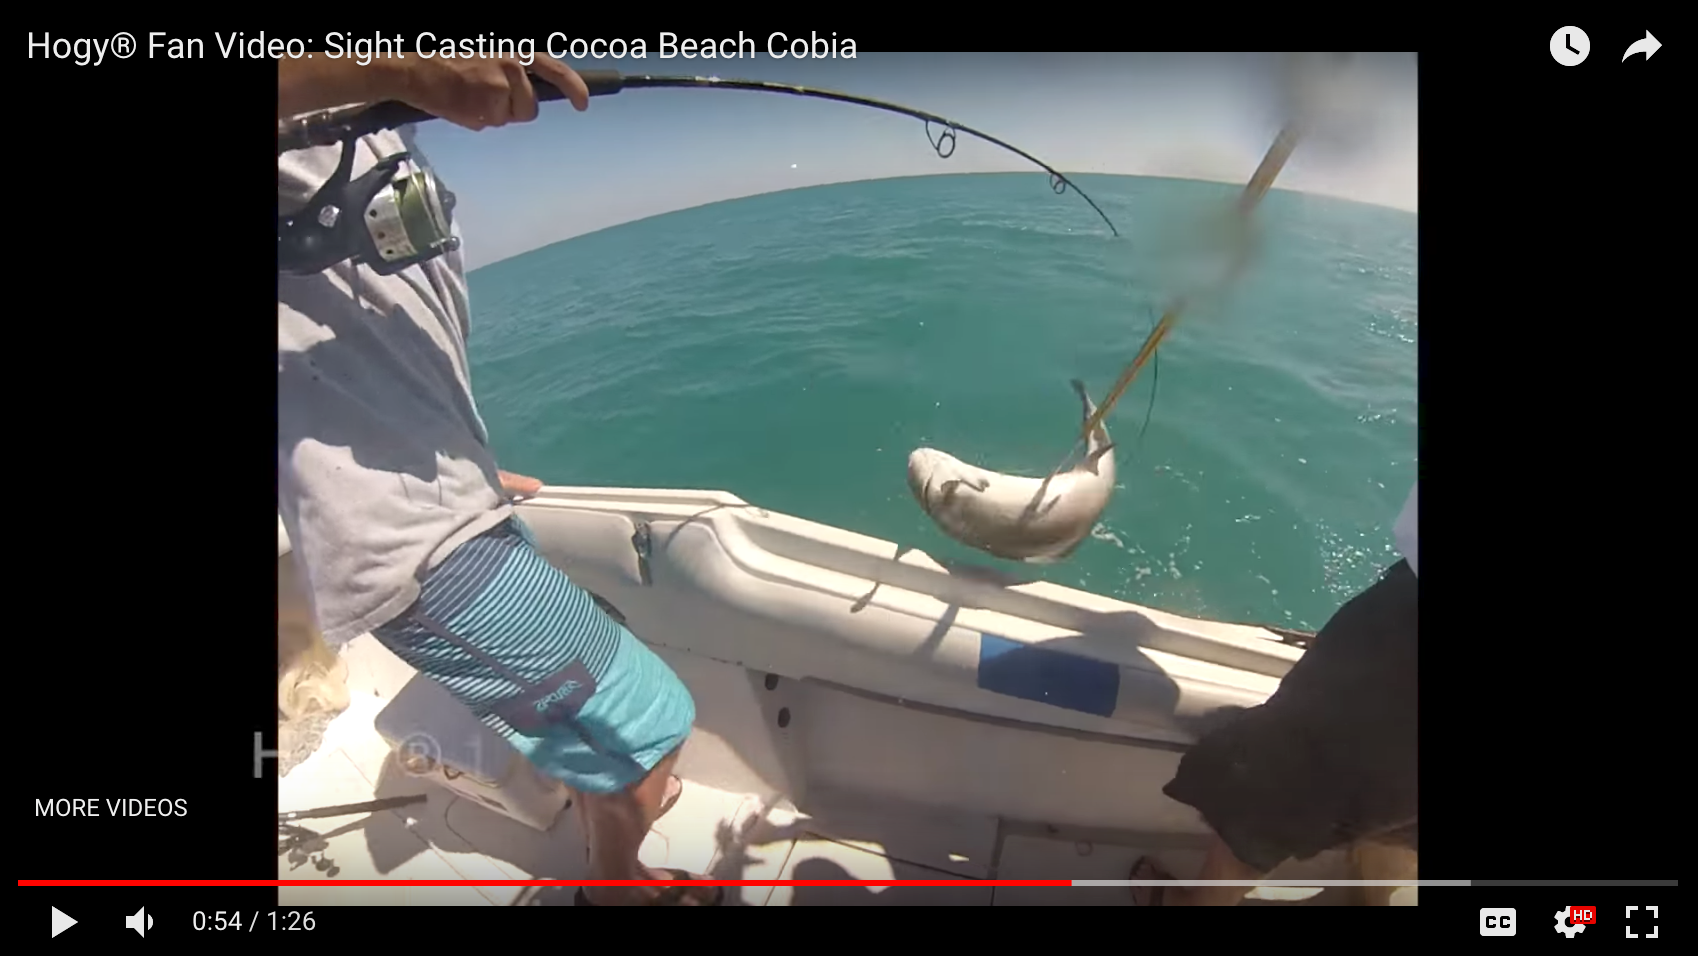 How-To: Sight Casting Cocoa Beach Cobia